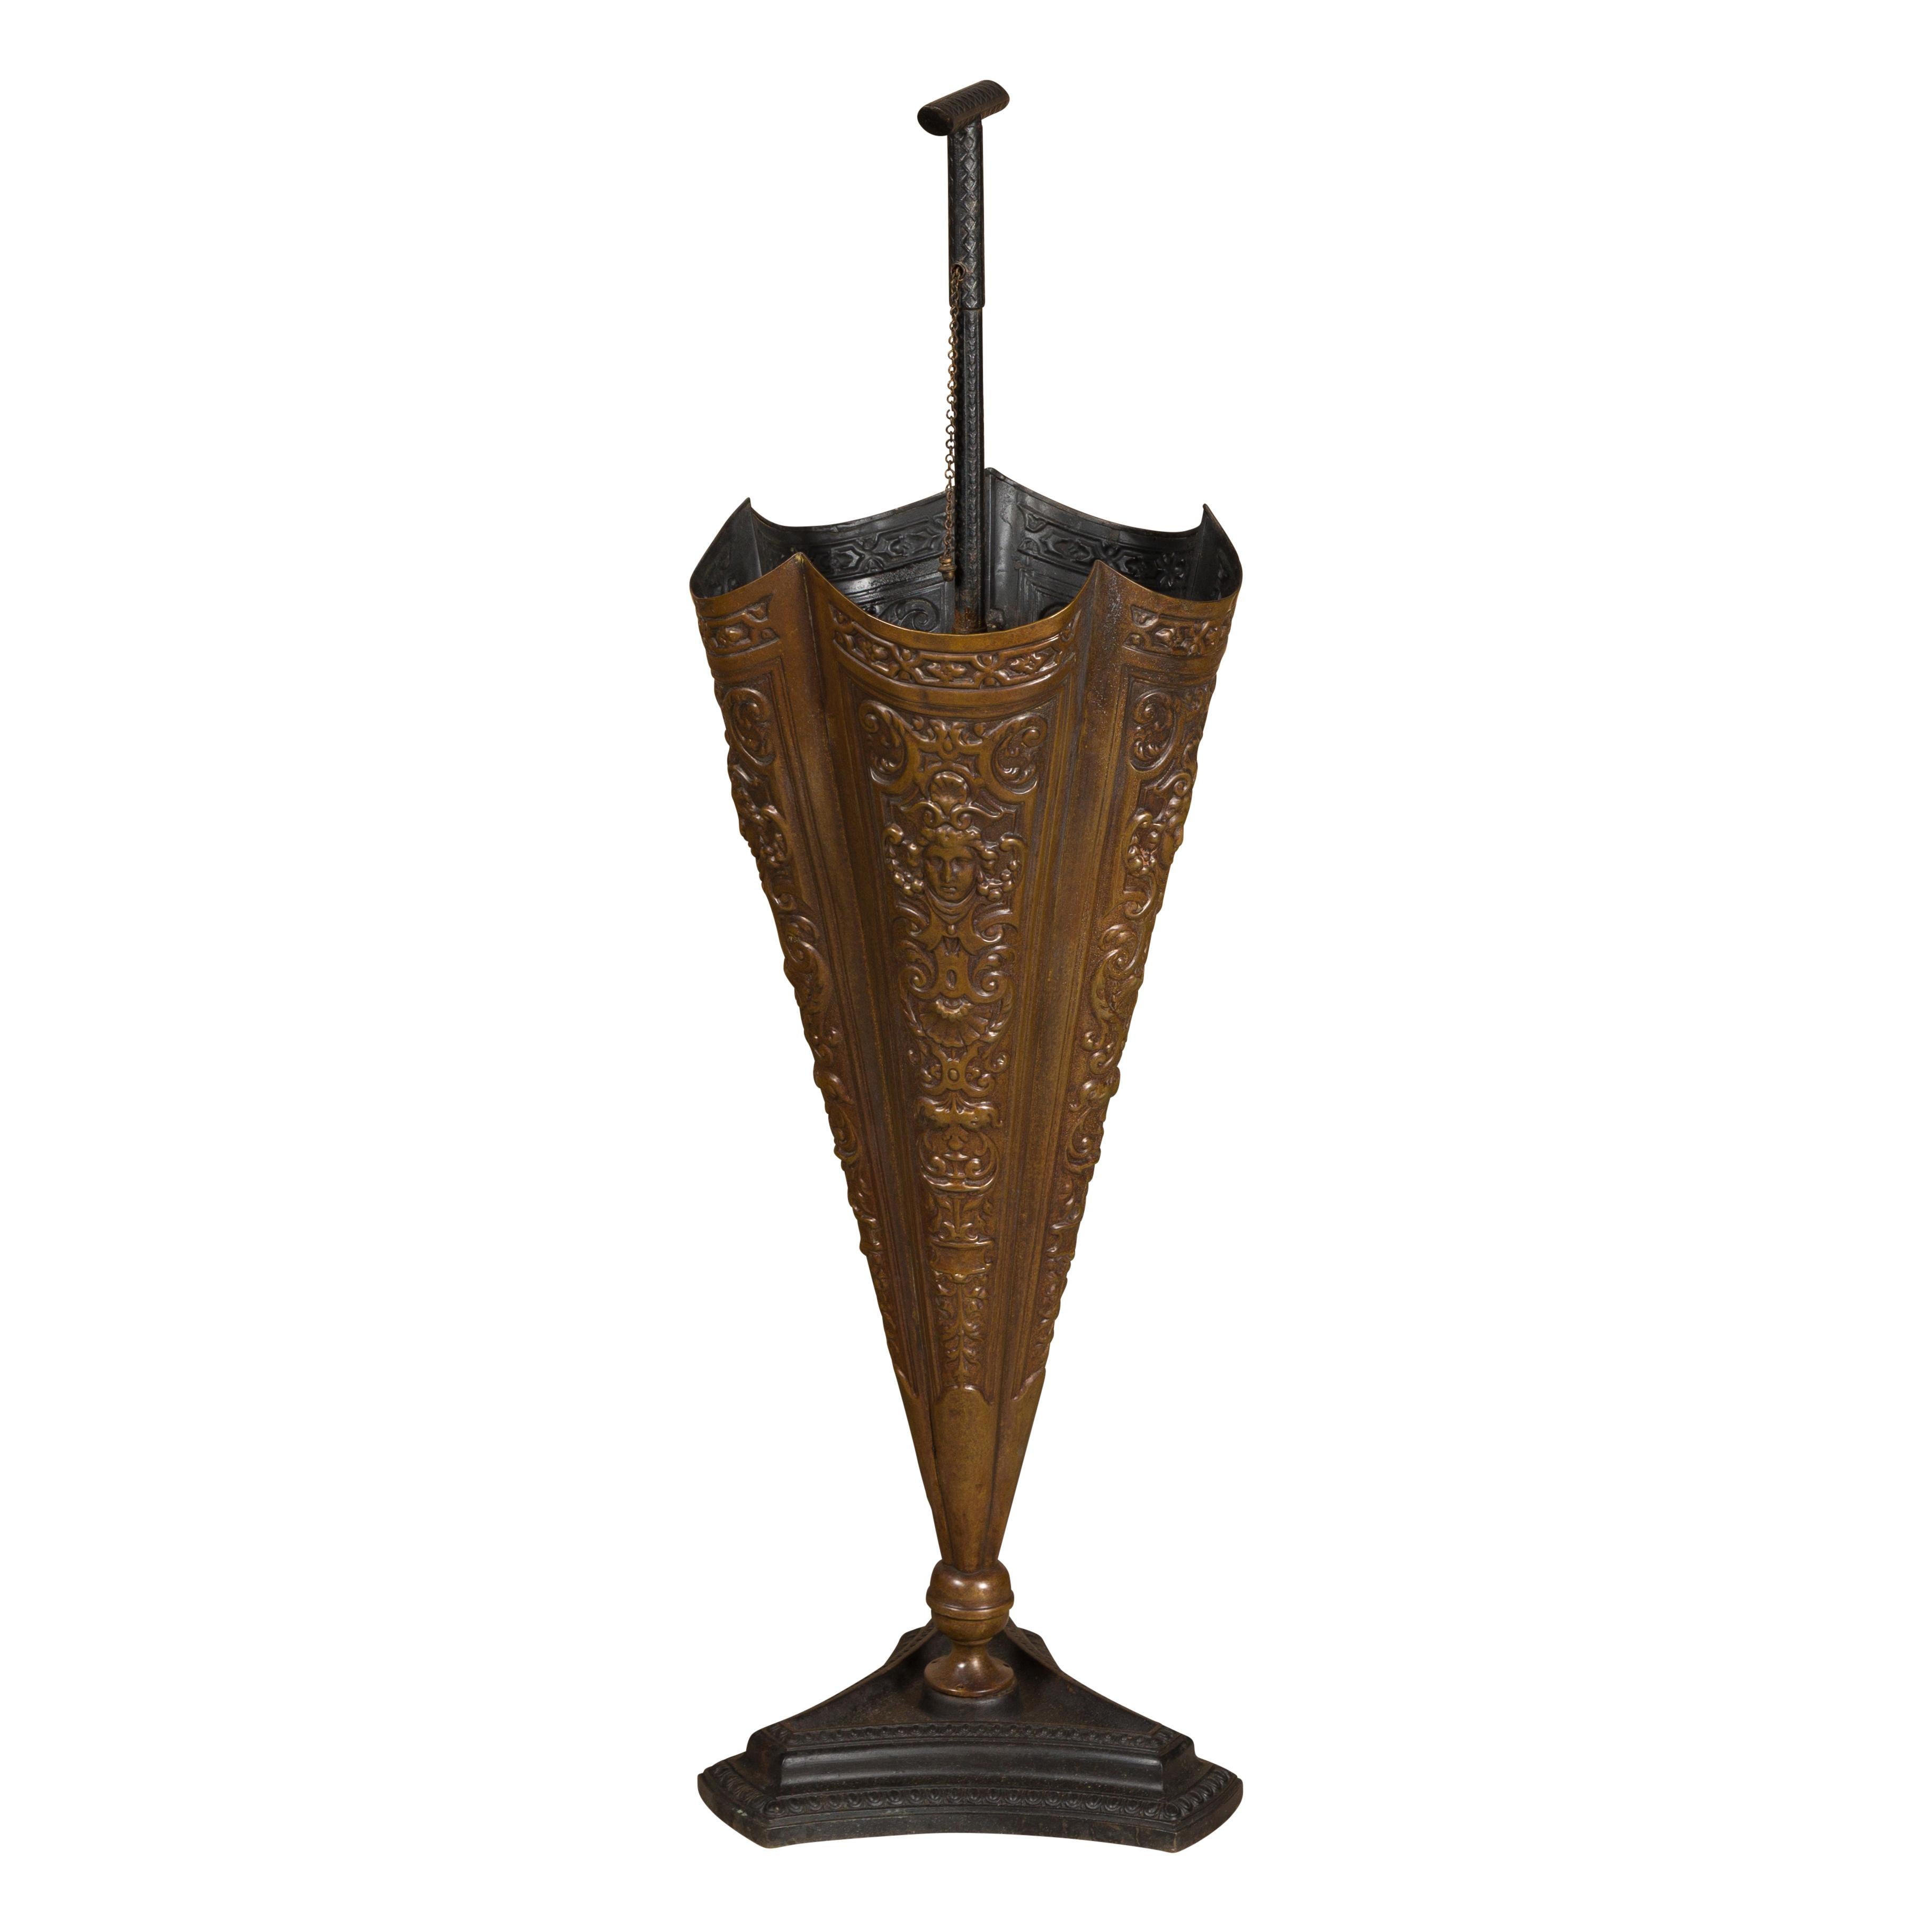 English 1920-1930 Brass Umbrella Stand with Raised Motifs and Tripartite Base For Sale 10